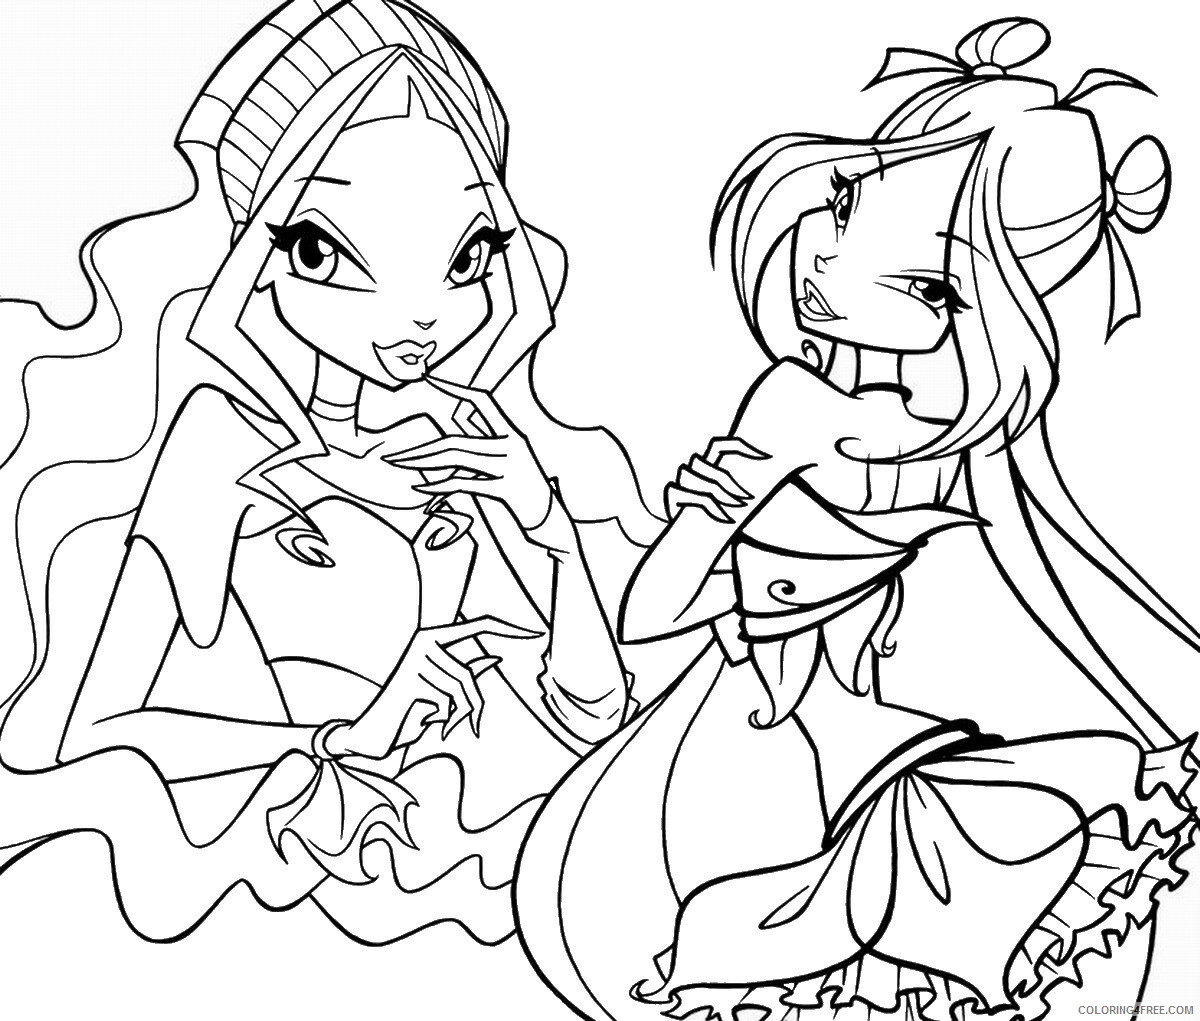 Winx Coloring Pages TV Film winx_cl_45 Printable 2020 11398 Coloring4free